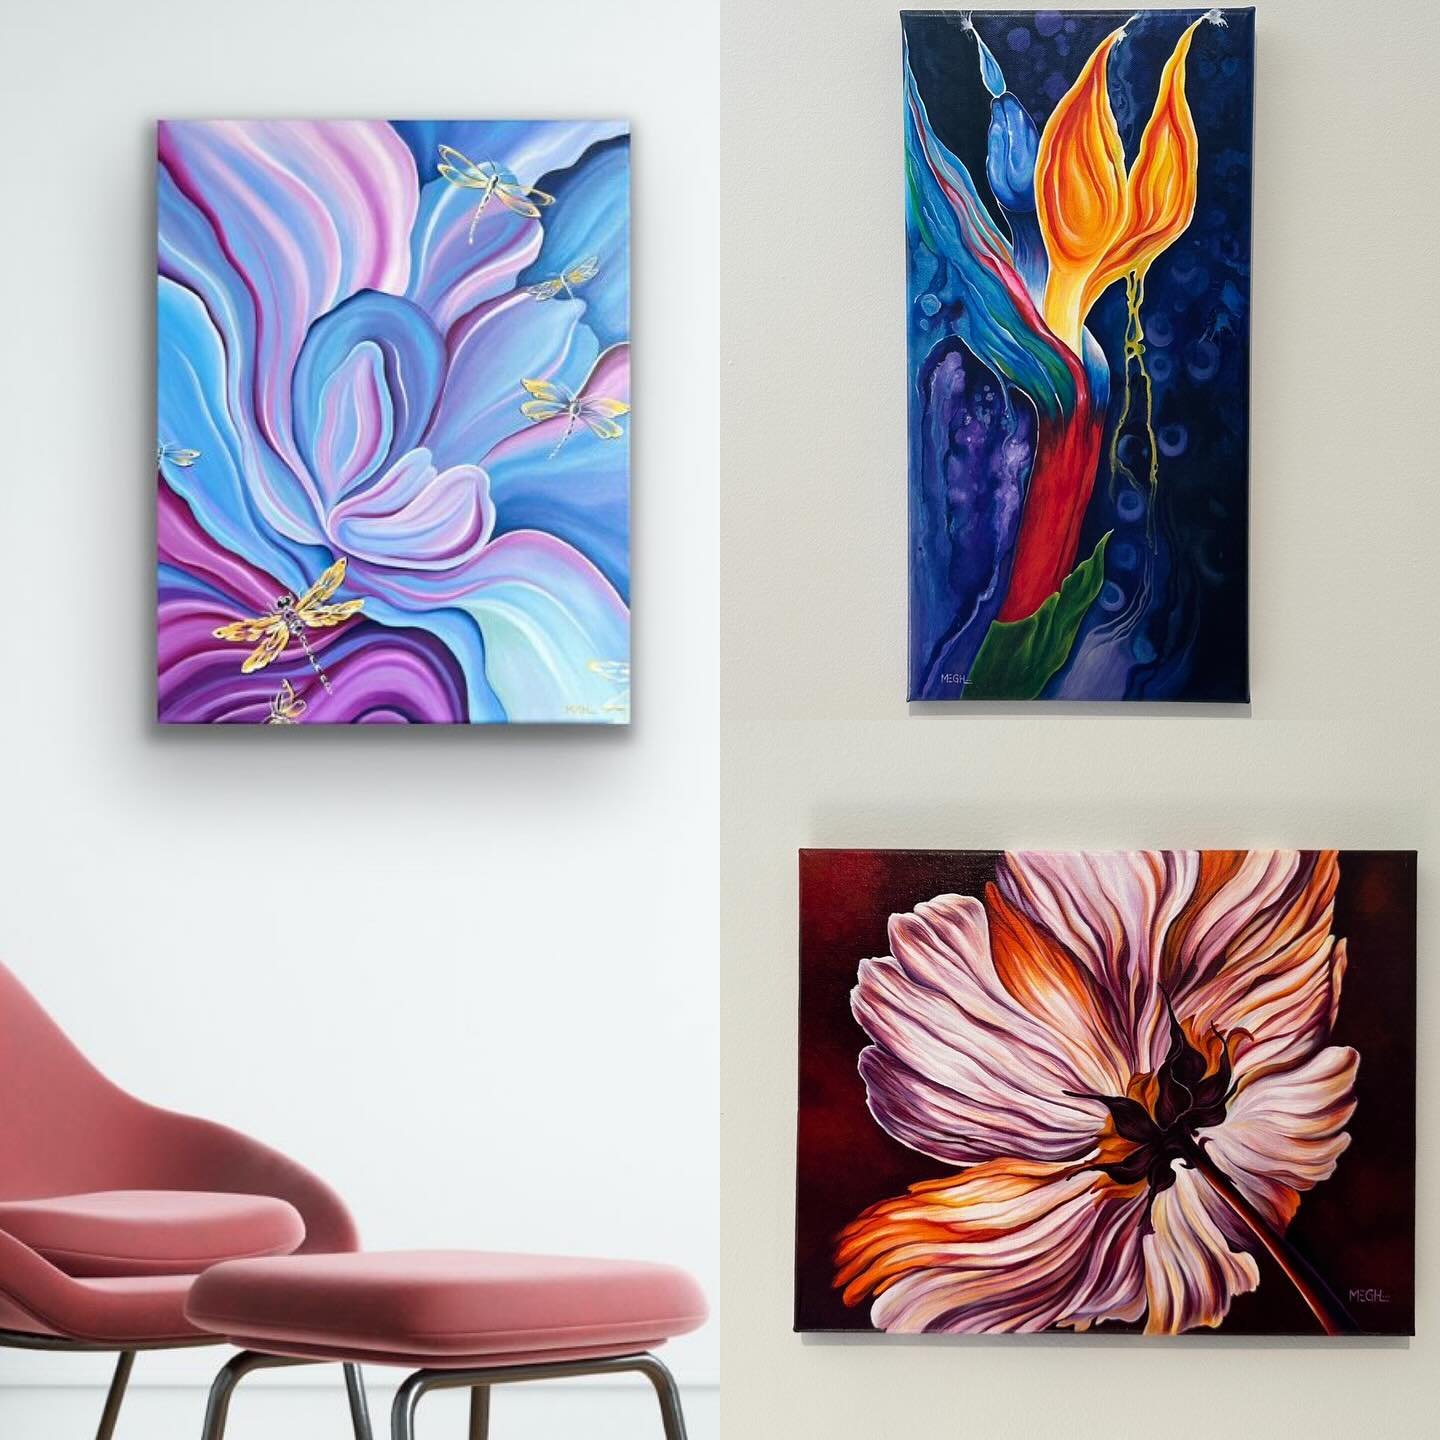 Just 3 days to go!!! 
I am getting ready to showcase my artworks @artsintheparkrva - the biggest art festival in Richmond,VA.😊 Come see my work and say Hello to me!😁 I will have abstracts and florals in some large statement pieces and I offer free 